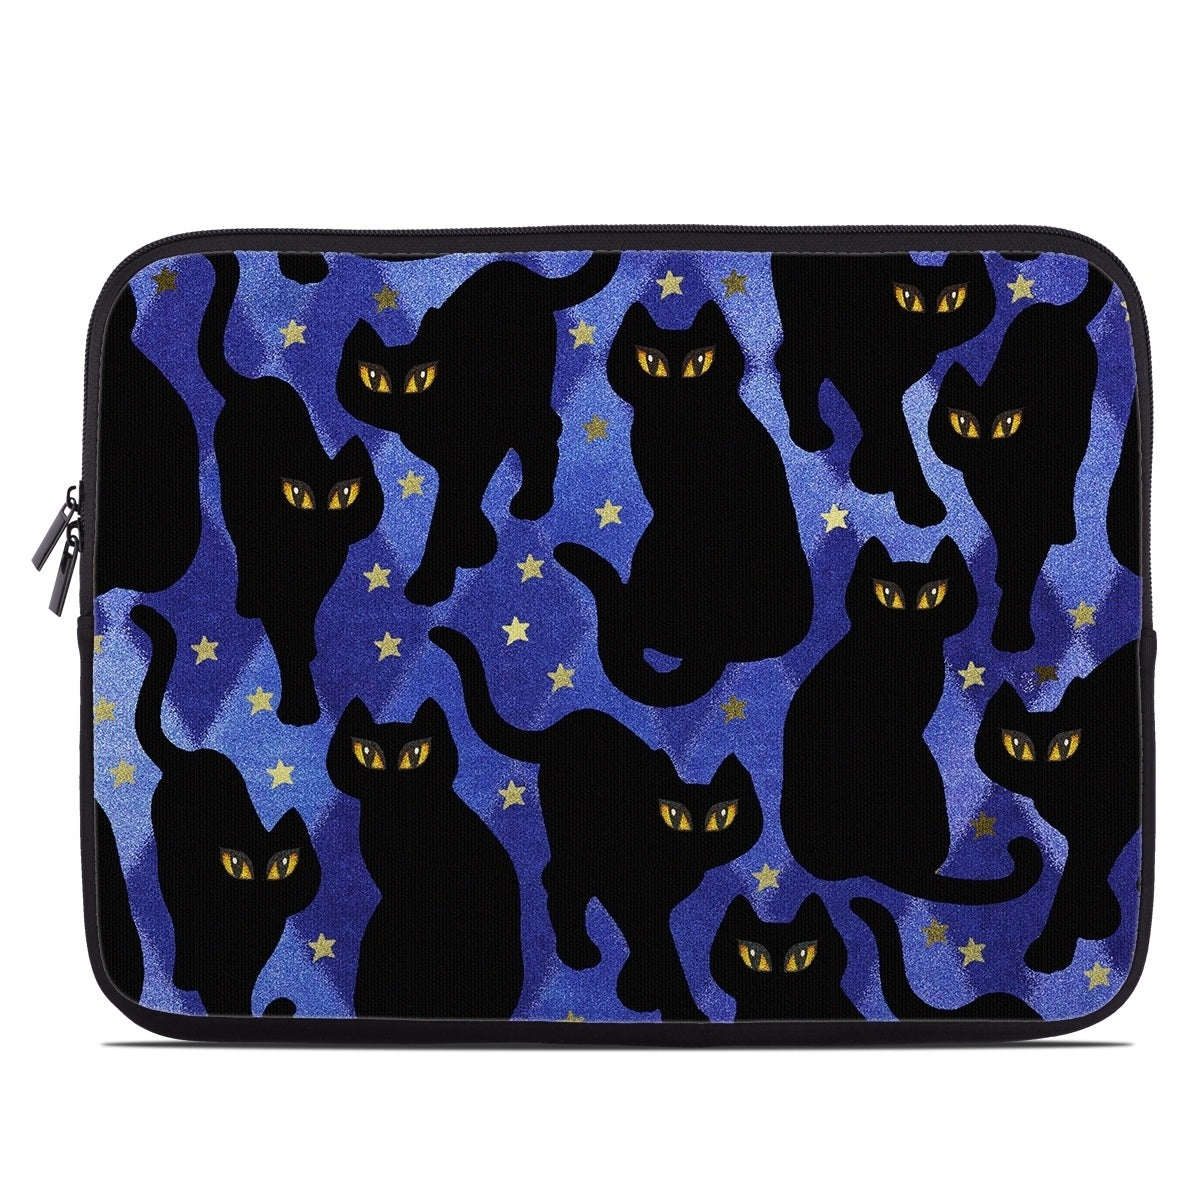 Cat Silhouettes - Laptop Sleeve